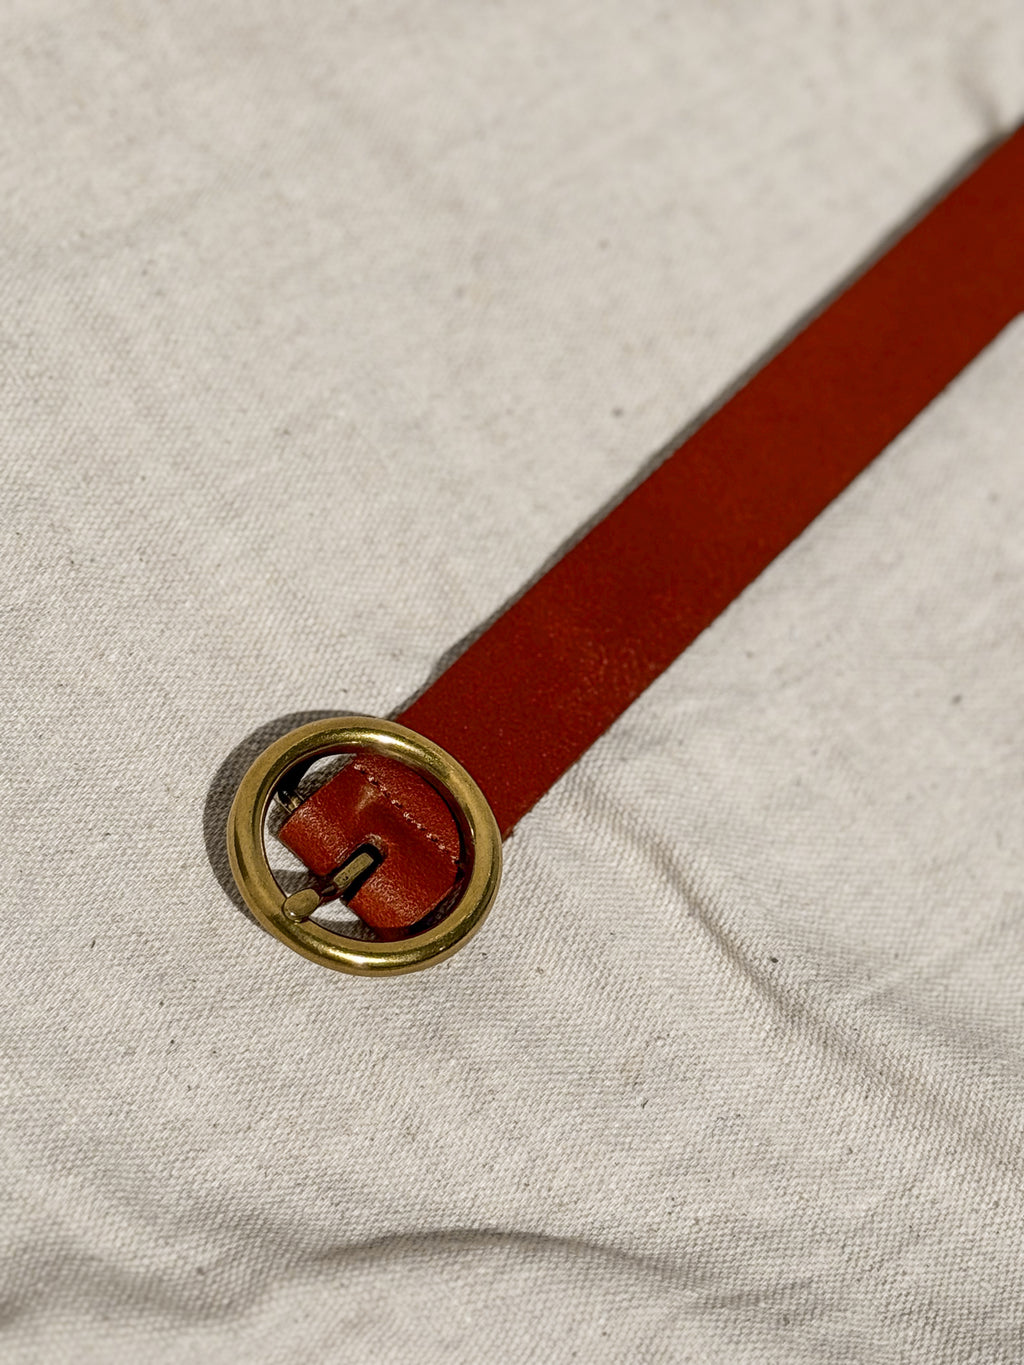 Circle Leather Belt in Tan - Stitch And Feather